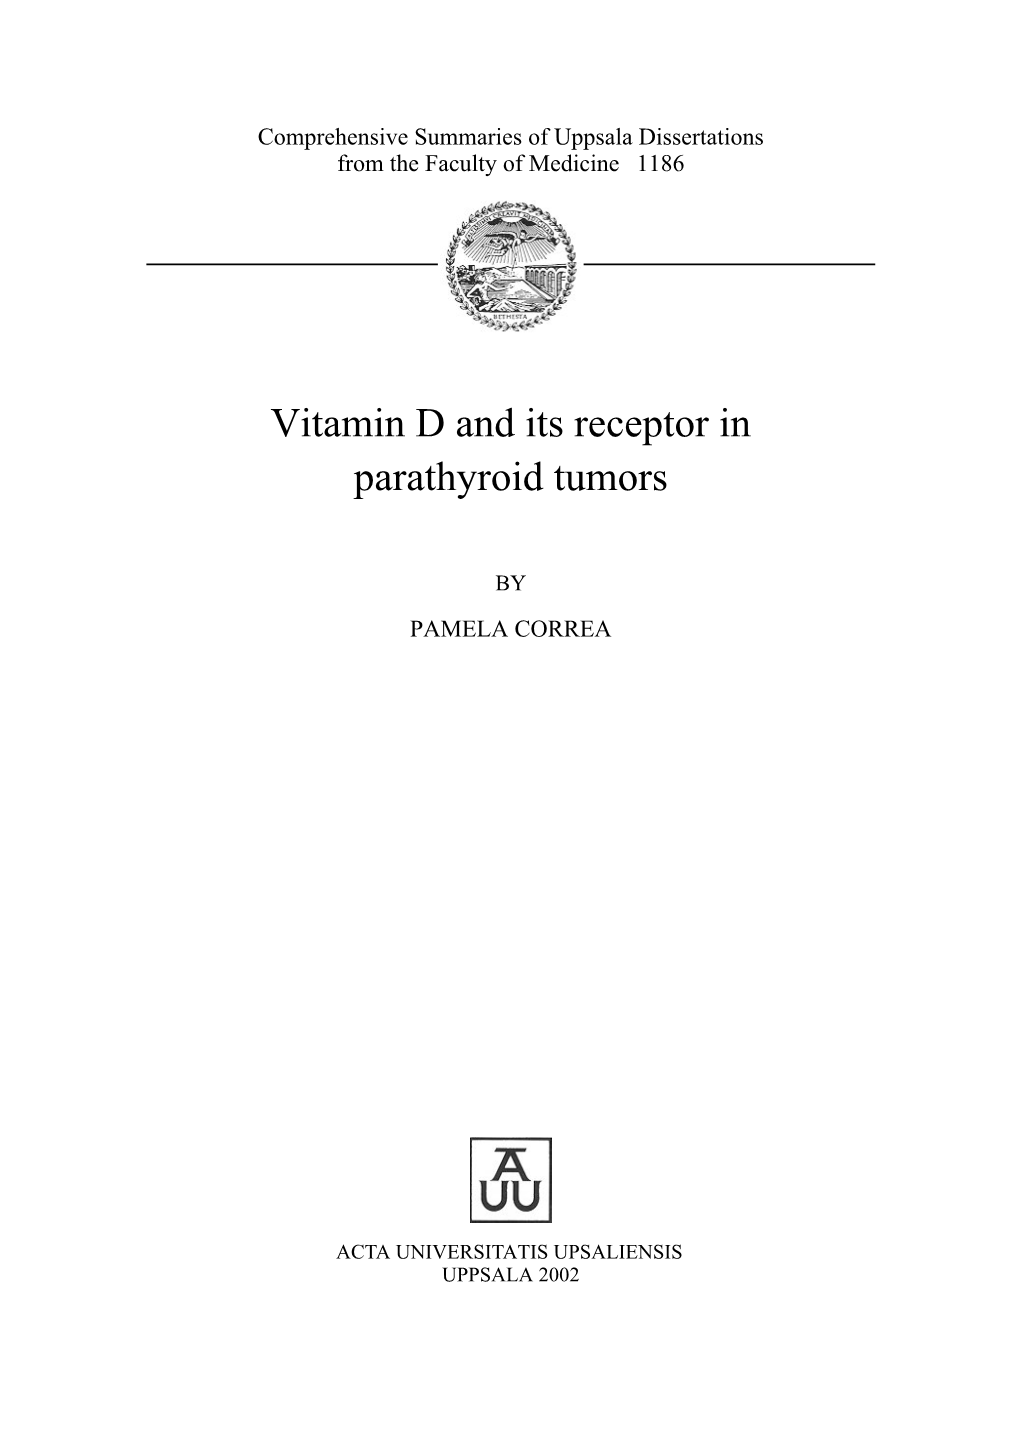 Vitamin D and Its Receptor in Parathyroid Tumors